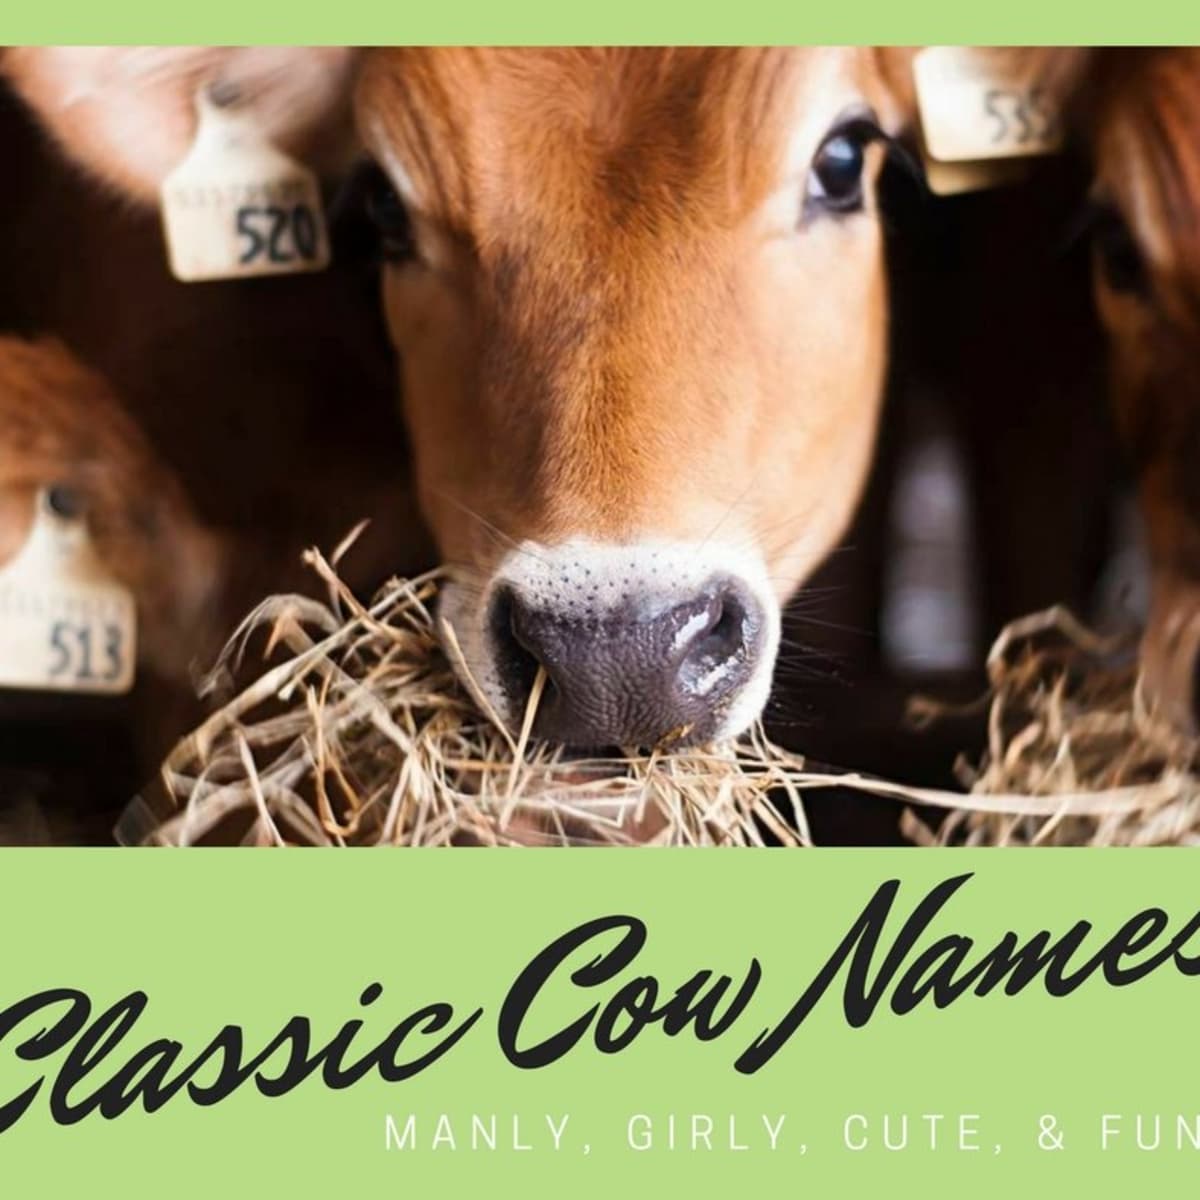 75 Classic Cow Names (From Annabelle to Sampson) - PetHelpful